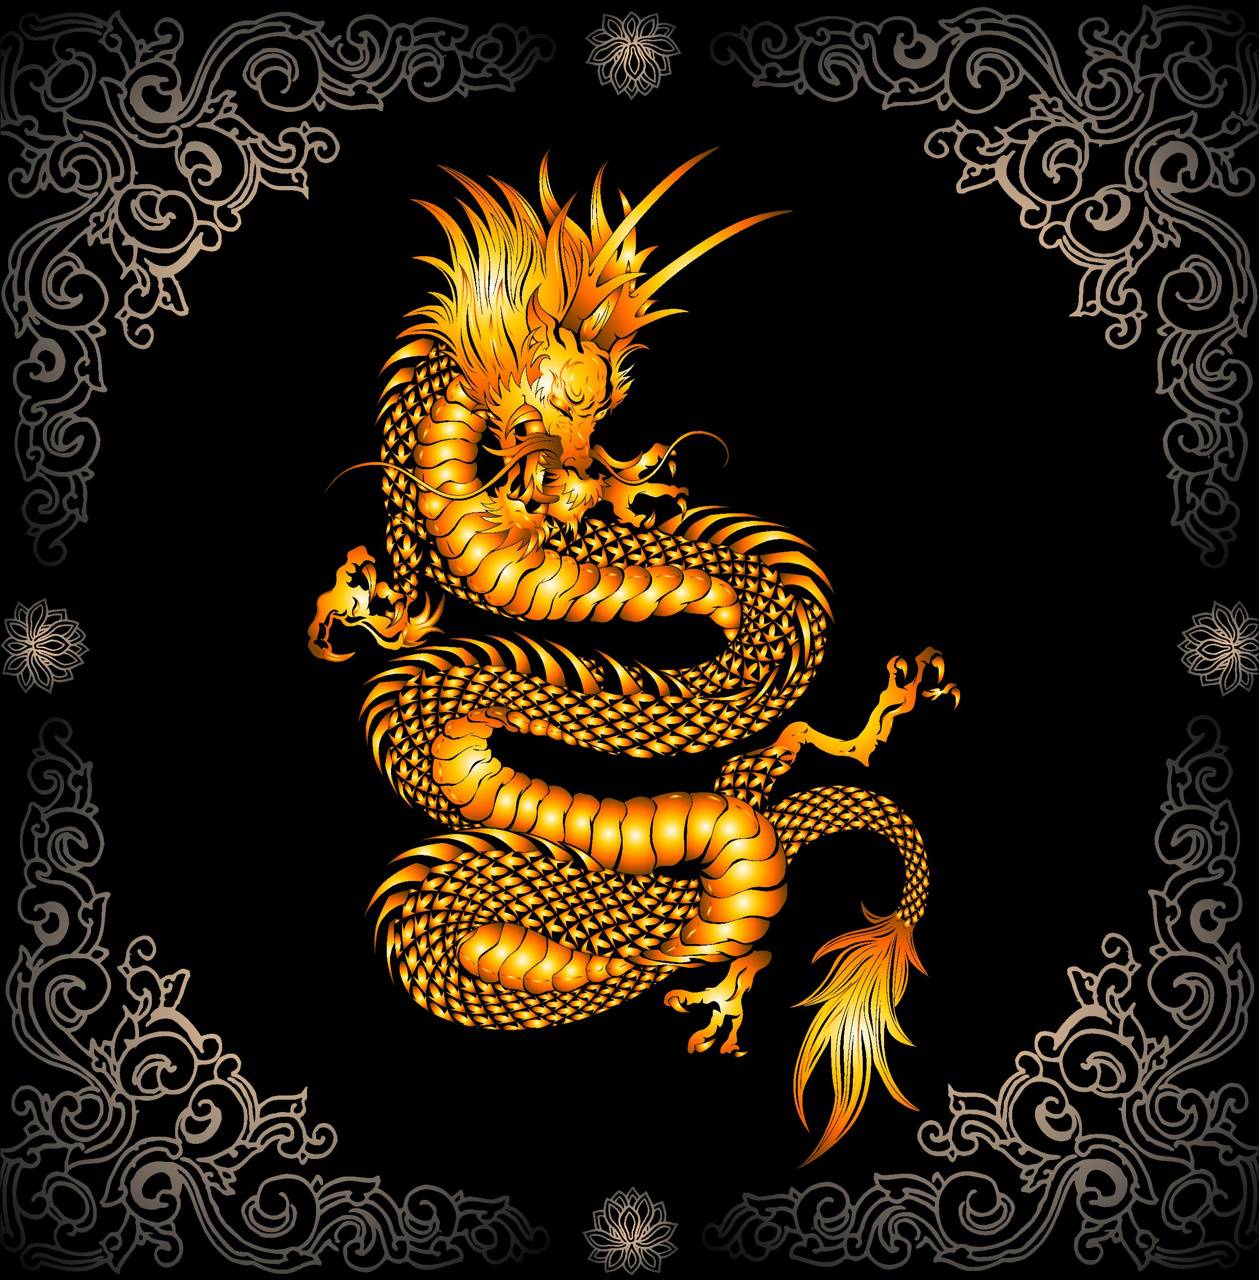 76+ Wallpaper Hd Golden Dragon Pictures - MyWeb